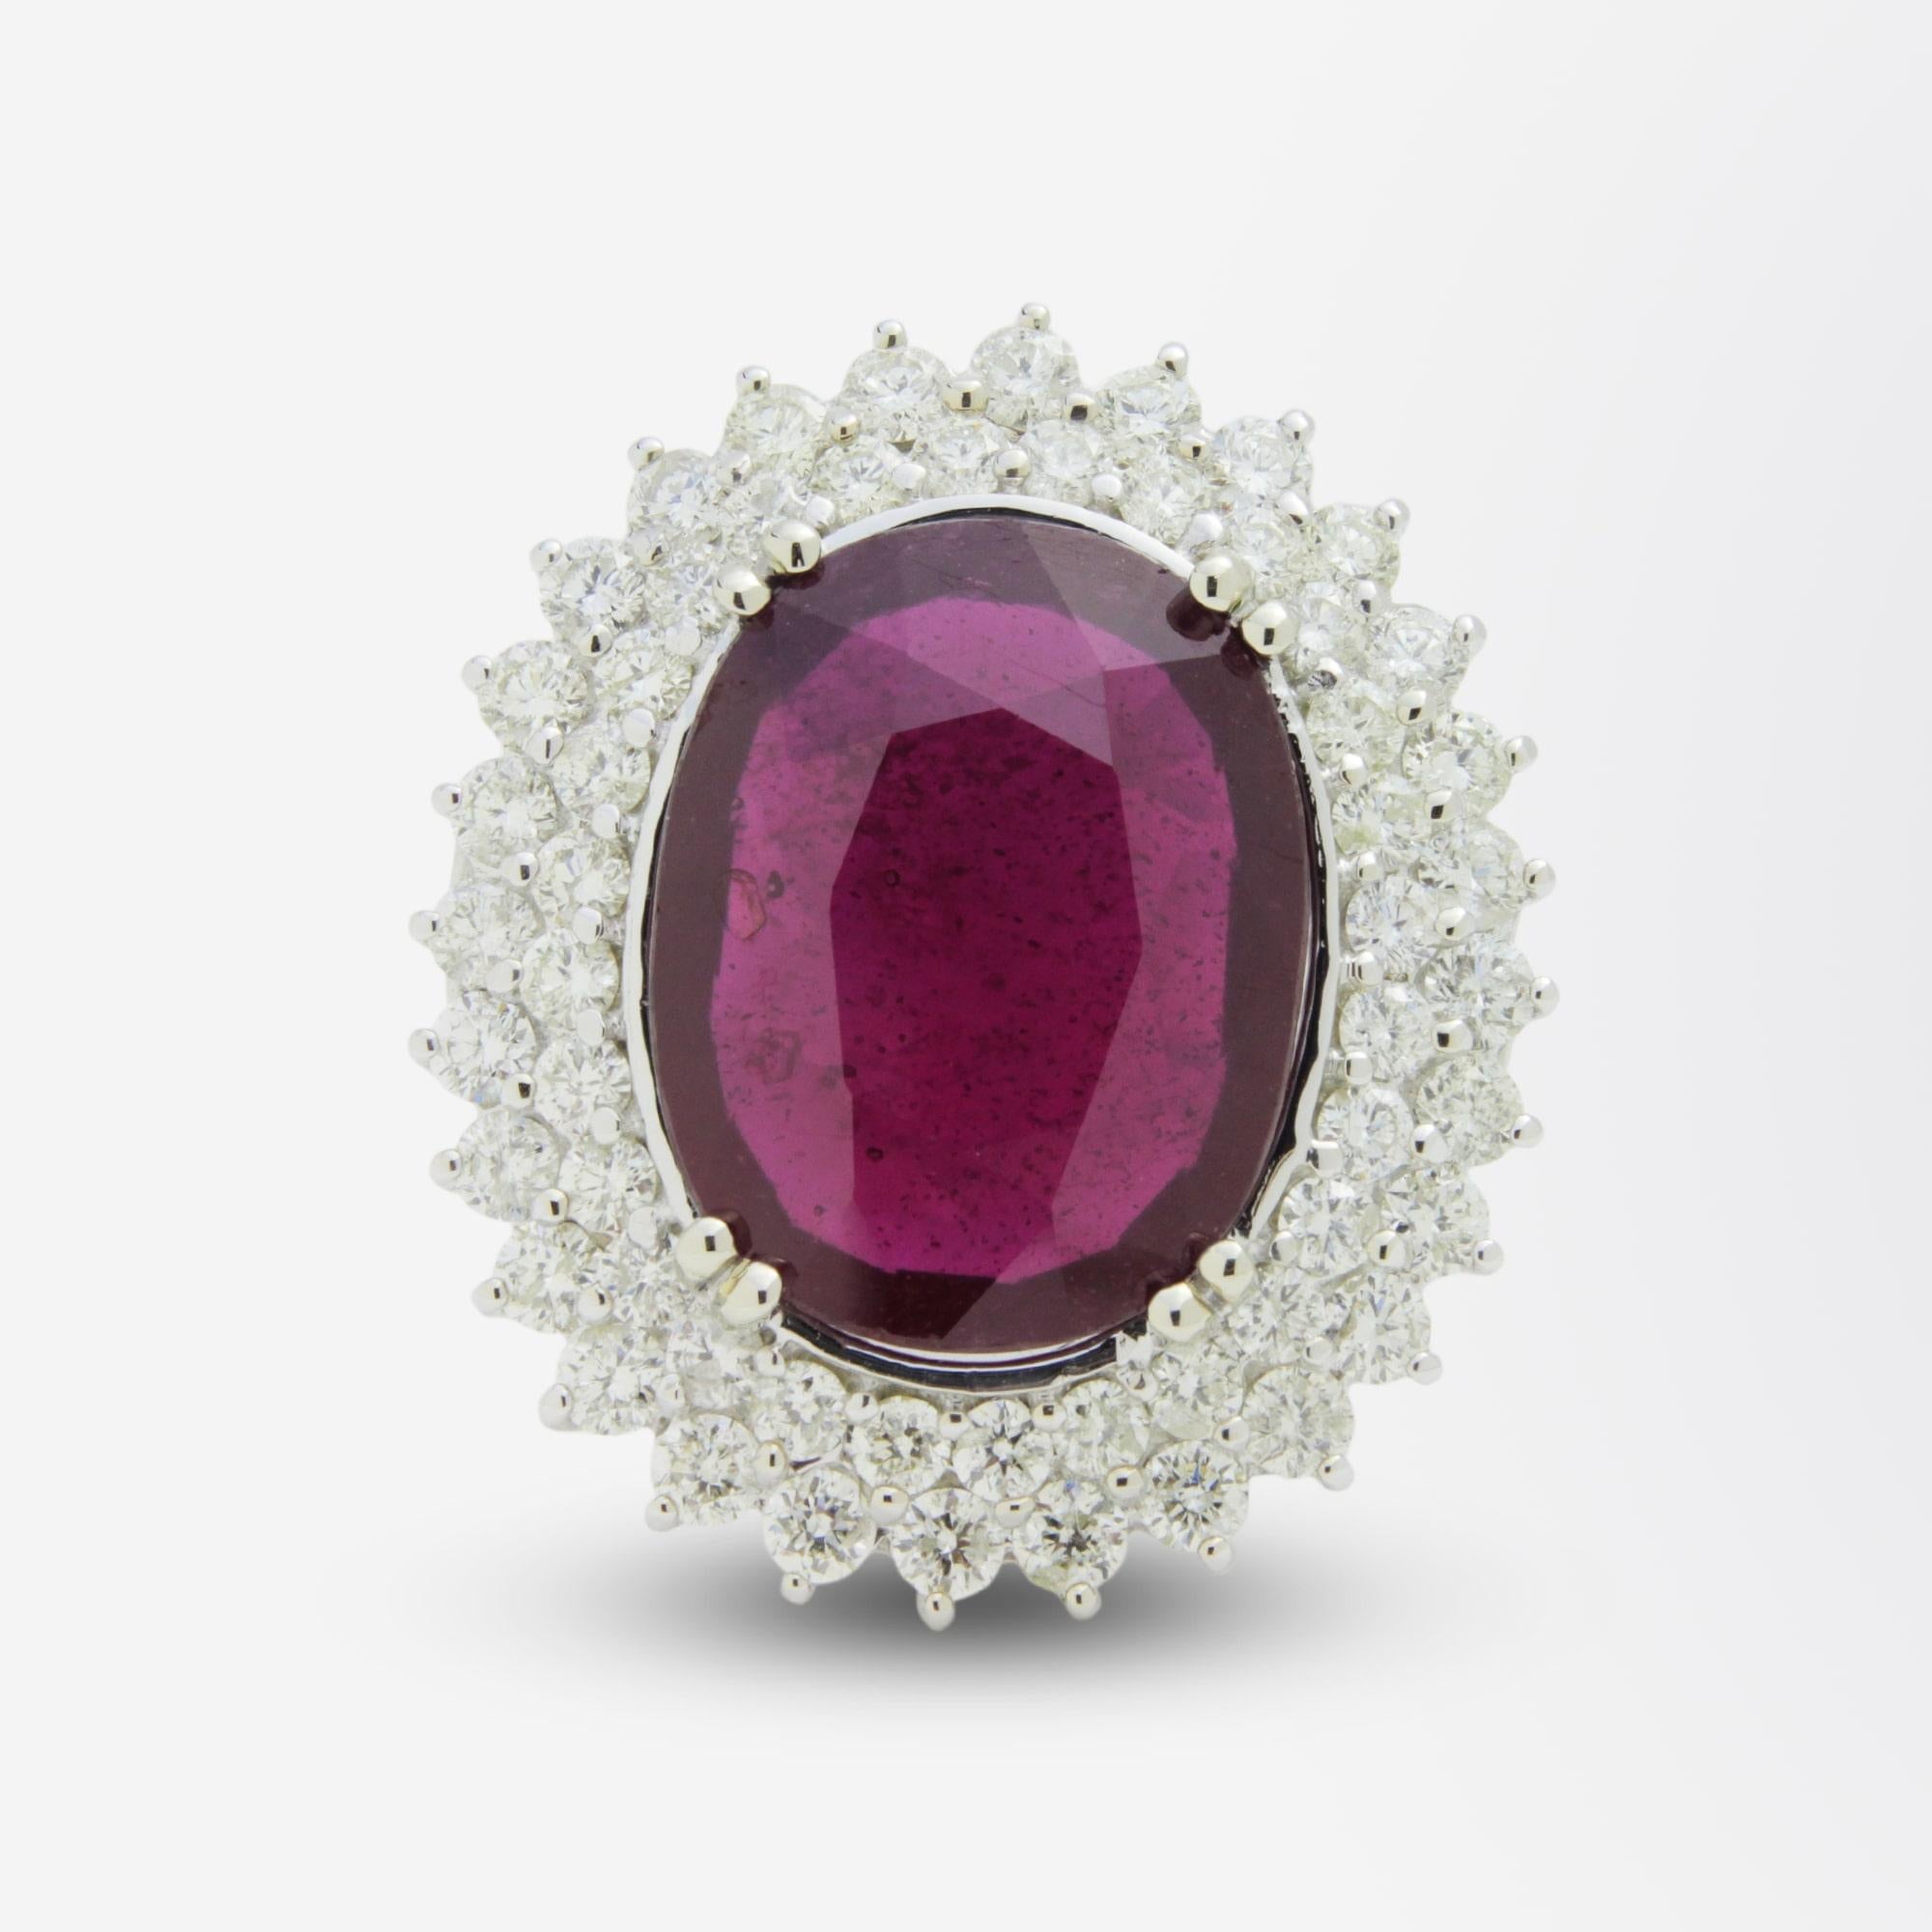 A very bold white gold ring containing a large, oval cut, fracture filled (glass) ruby surrounded by brilliant cut diamonds. The ring is crafted from 14 karat white gold and contains the central ruby estimated at 12 carat, which has two halos of